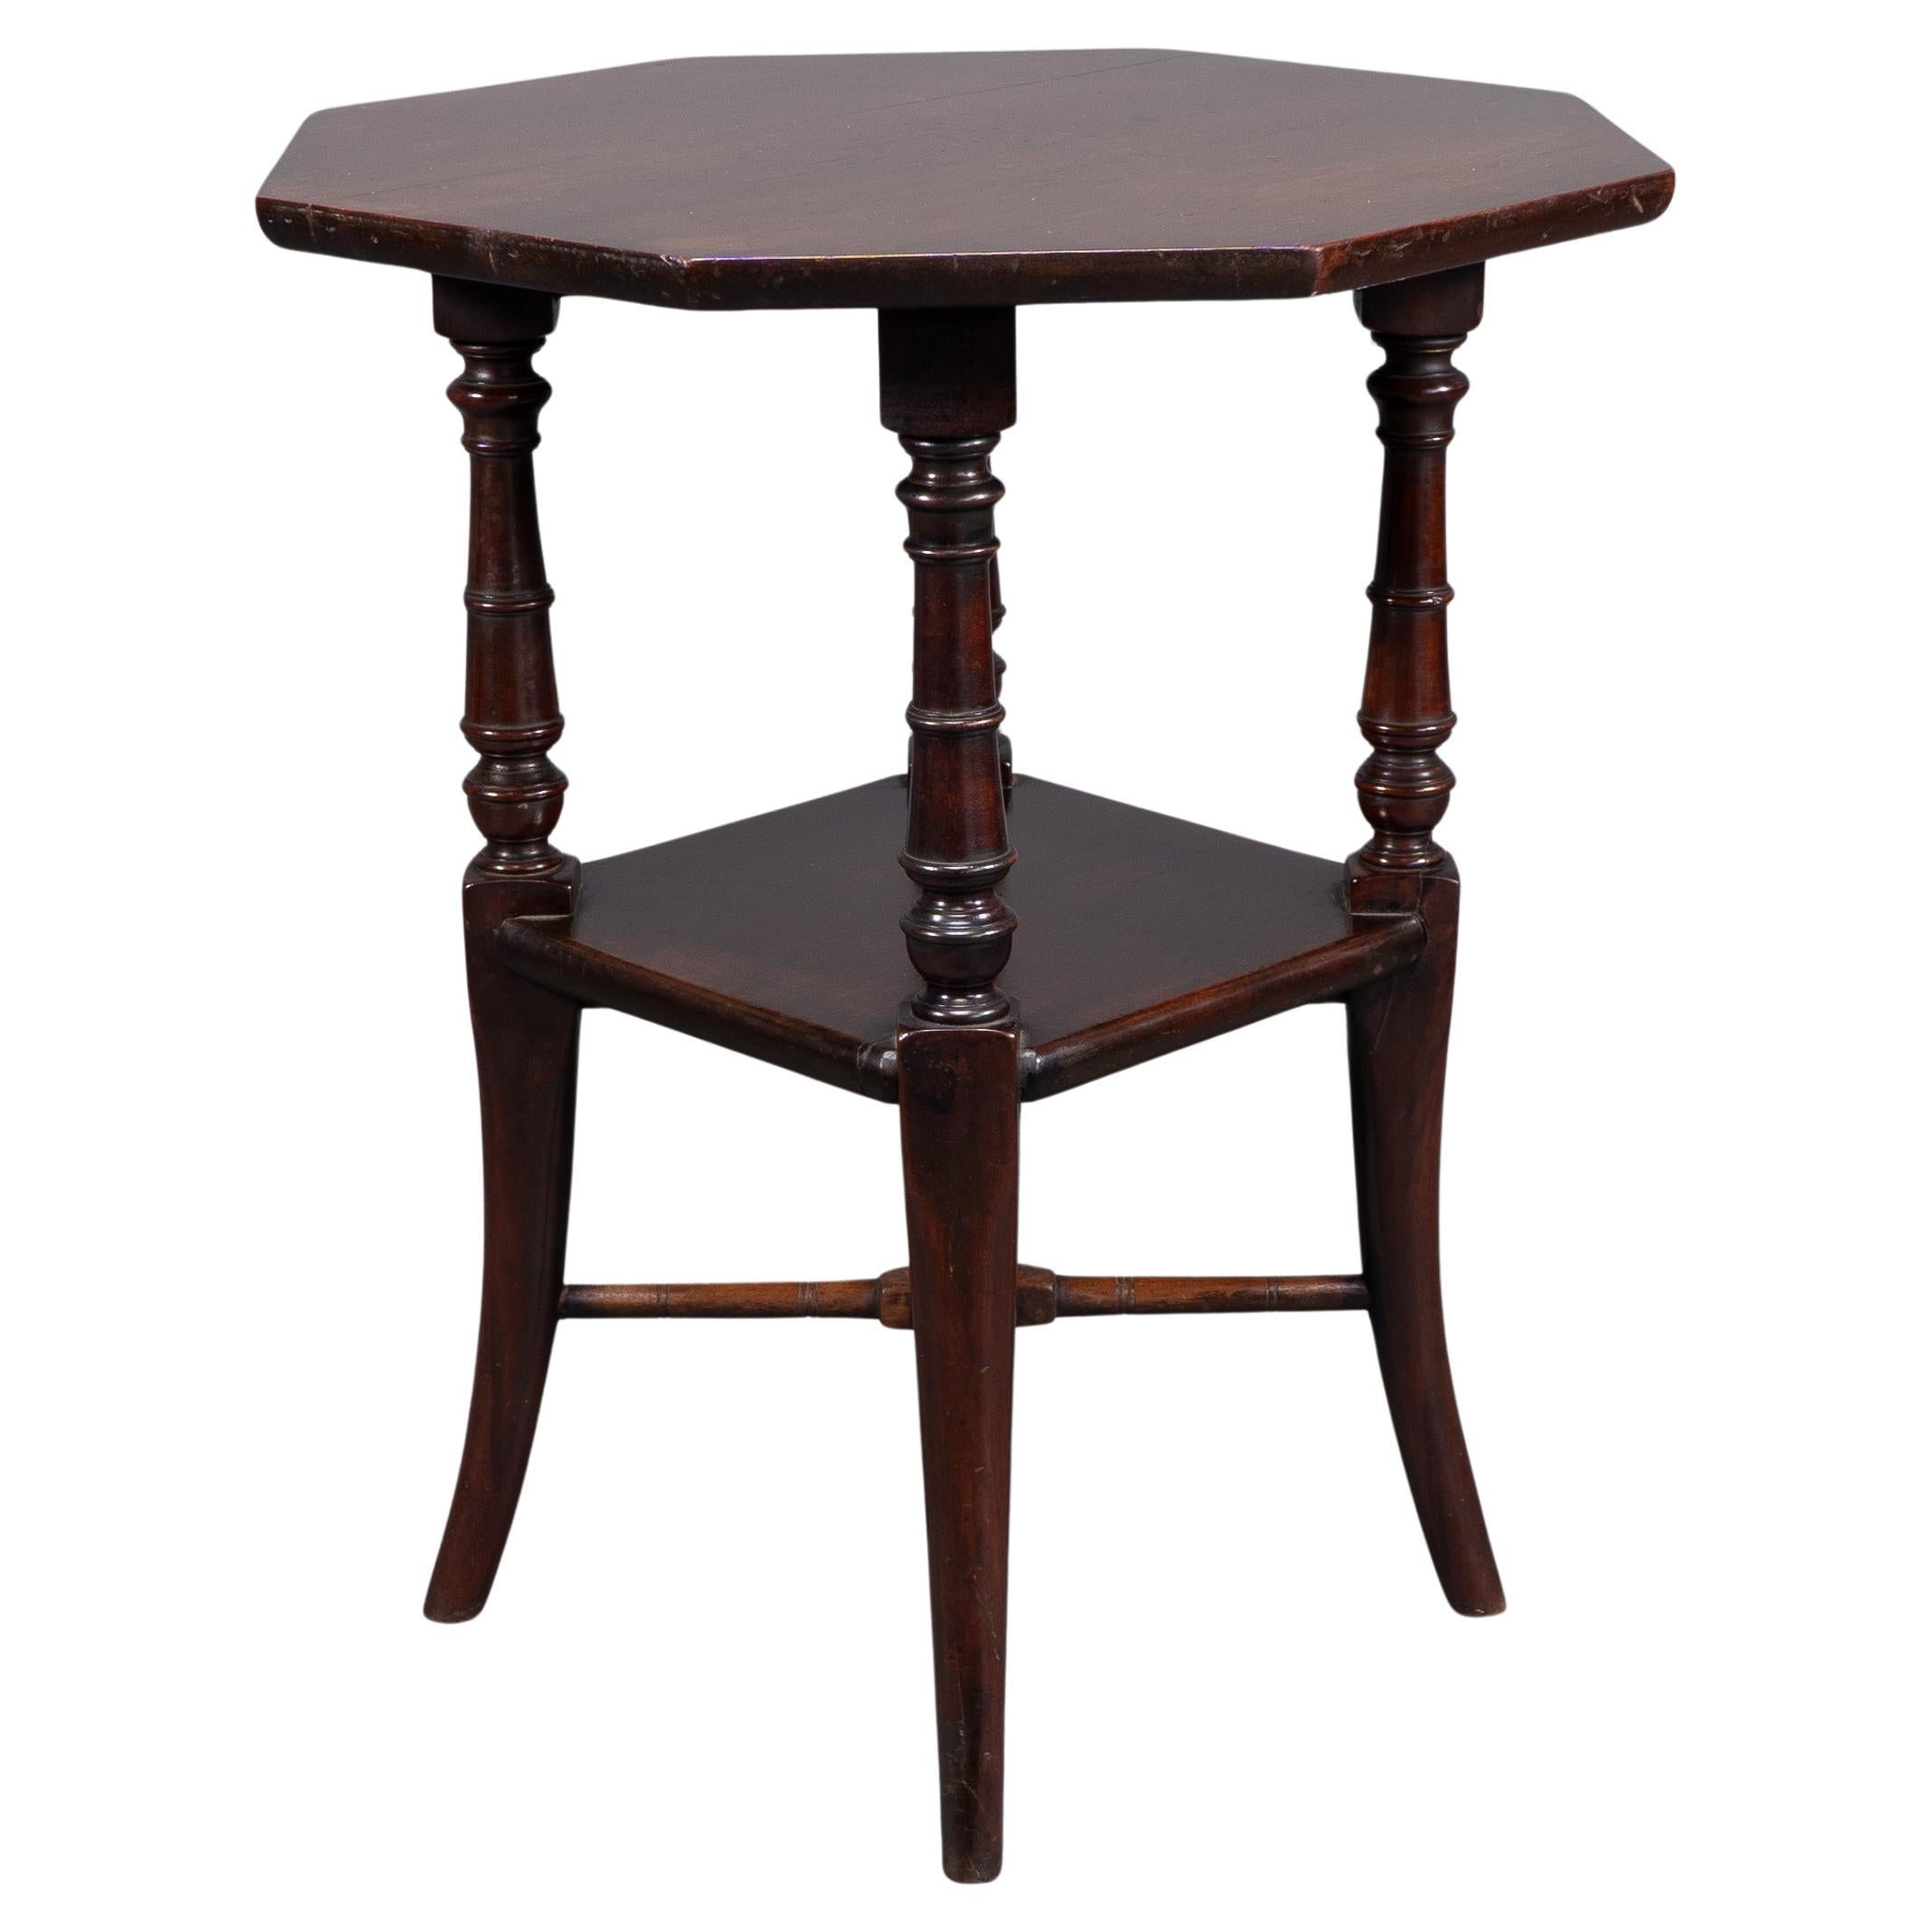 Jas Shoolbred attributed. An Aesthetic Movement octagonal Mahogany side table